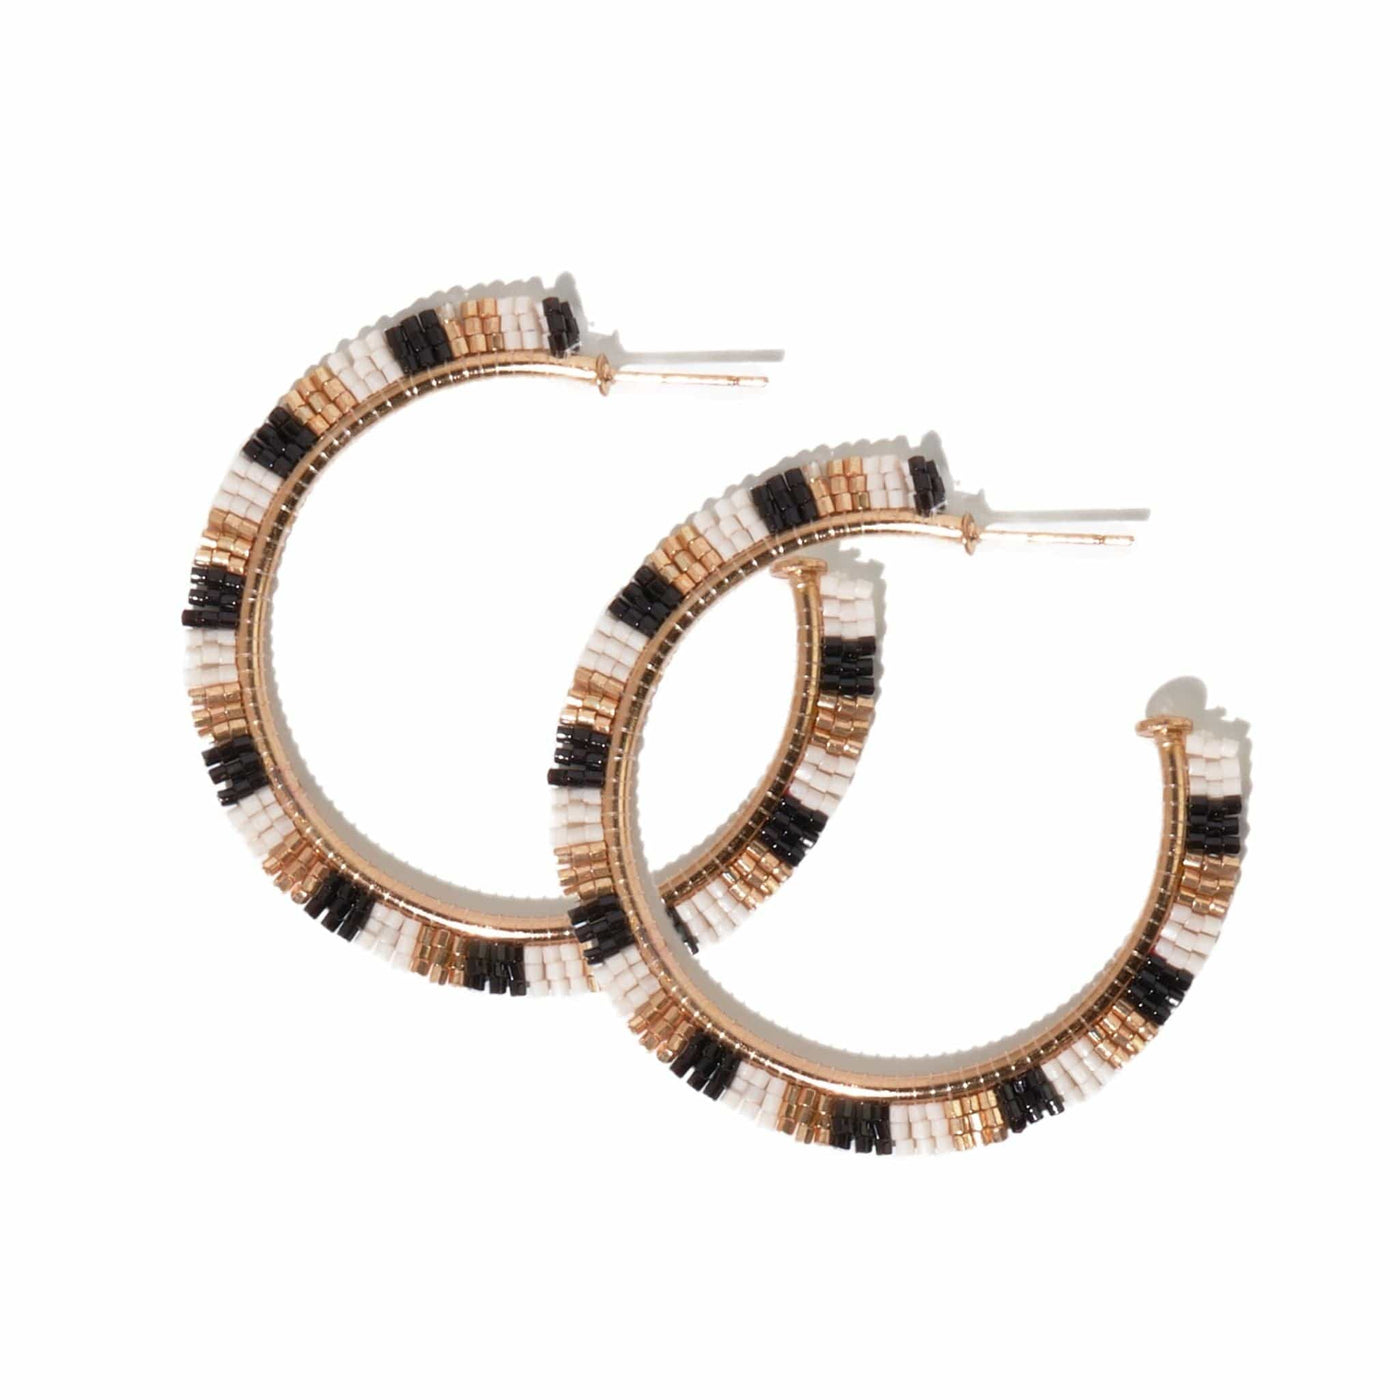 Nora Beaded Striped Hoop Earrings in black, white, and gold, front view.